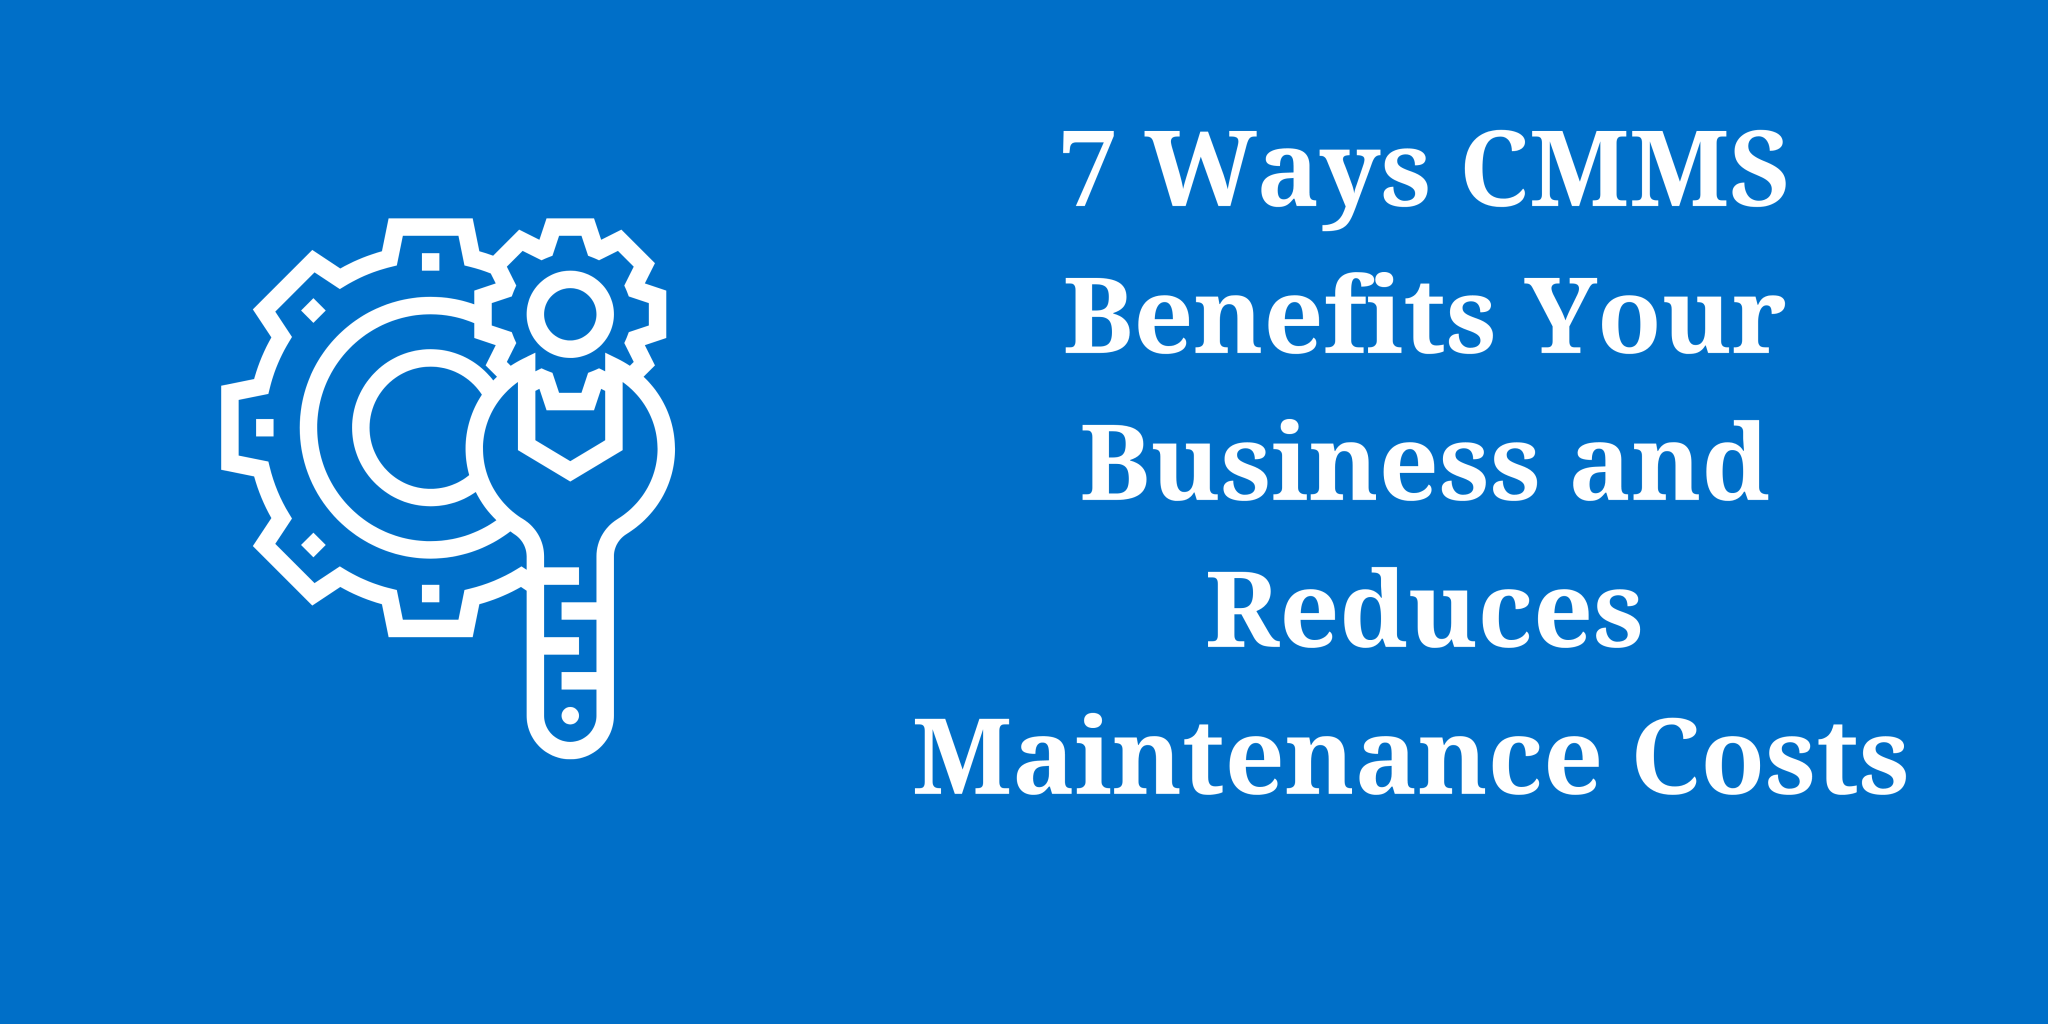 7 Ways CMMS Benefits Your Business and Reduces Maintenance Costs